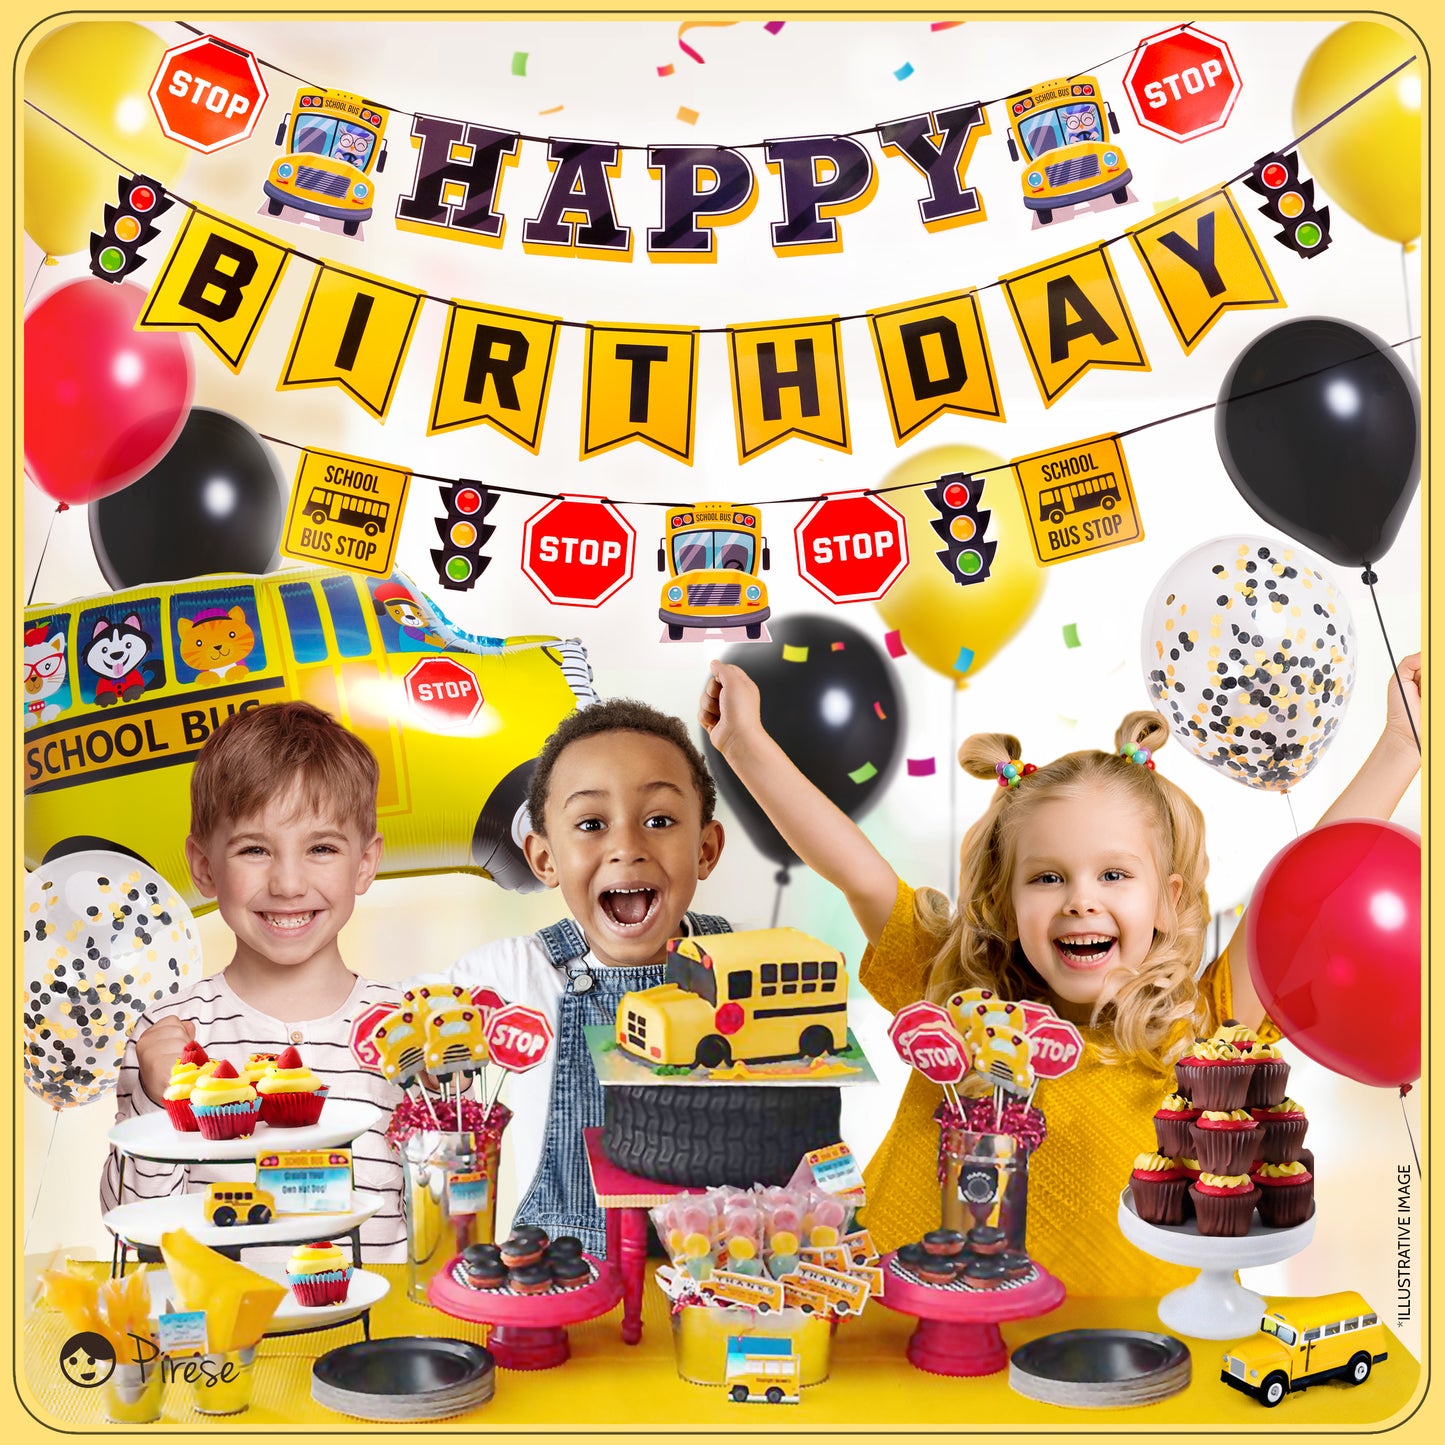 Pirese Wheels On The Bus Birthday Decorations, School Bus Decorations